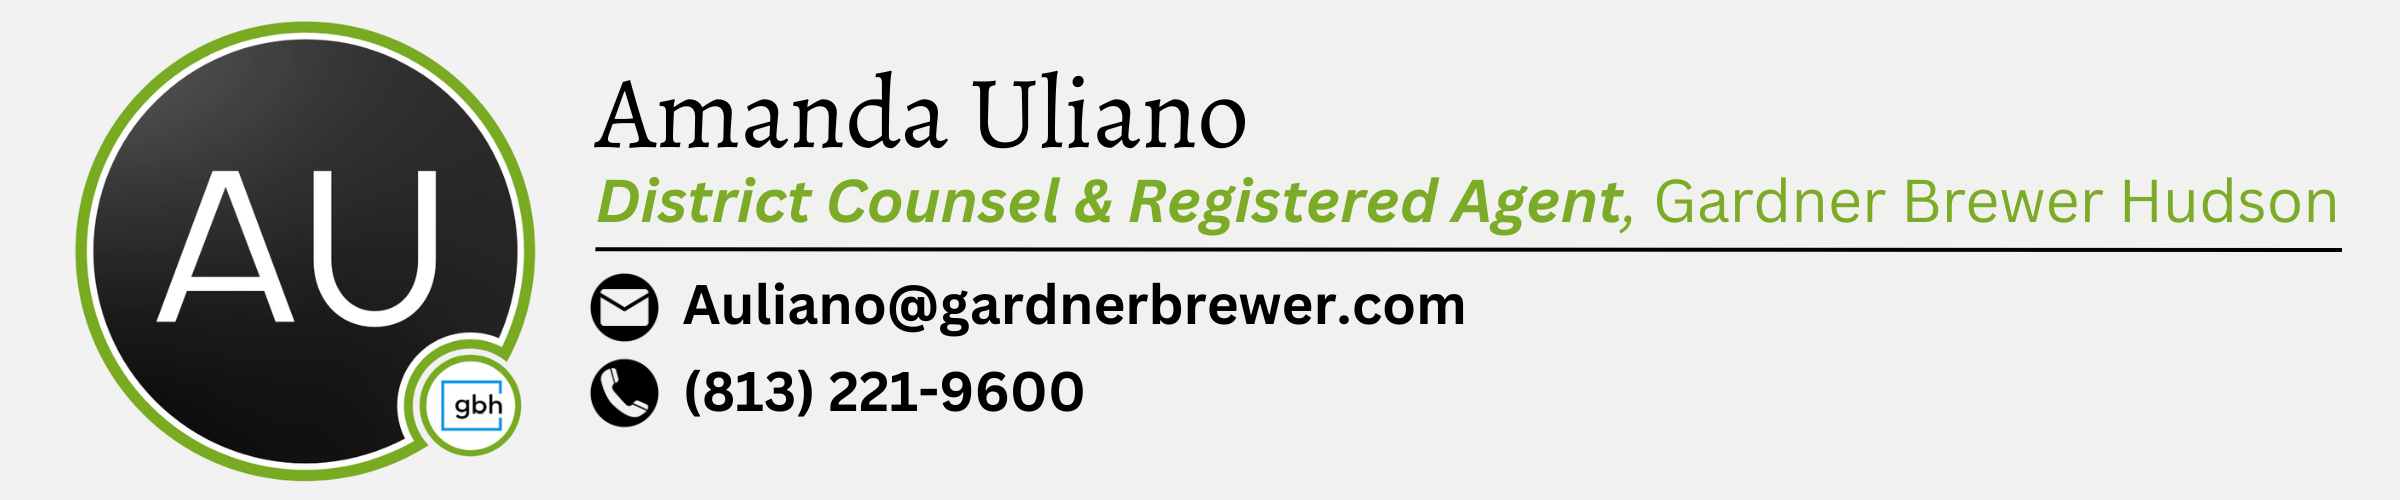 Amanda Uliano. District Counsel & Registered Agent, Gardner Brewer Hudson. Email is Auliano@gardnerbrewer.com. Phone number is 813-221-9600.